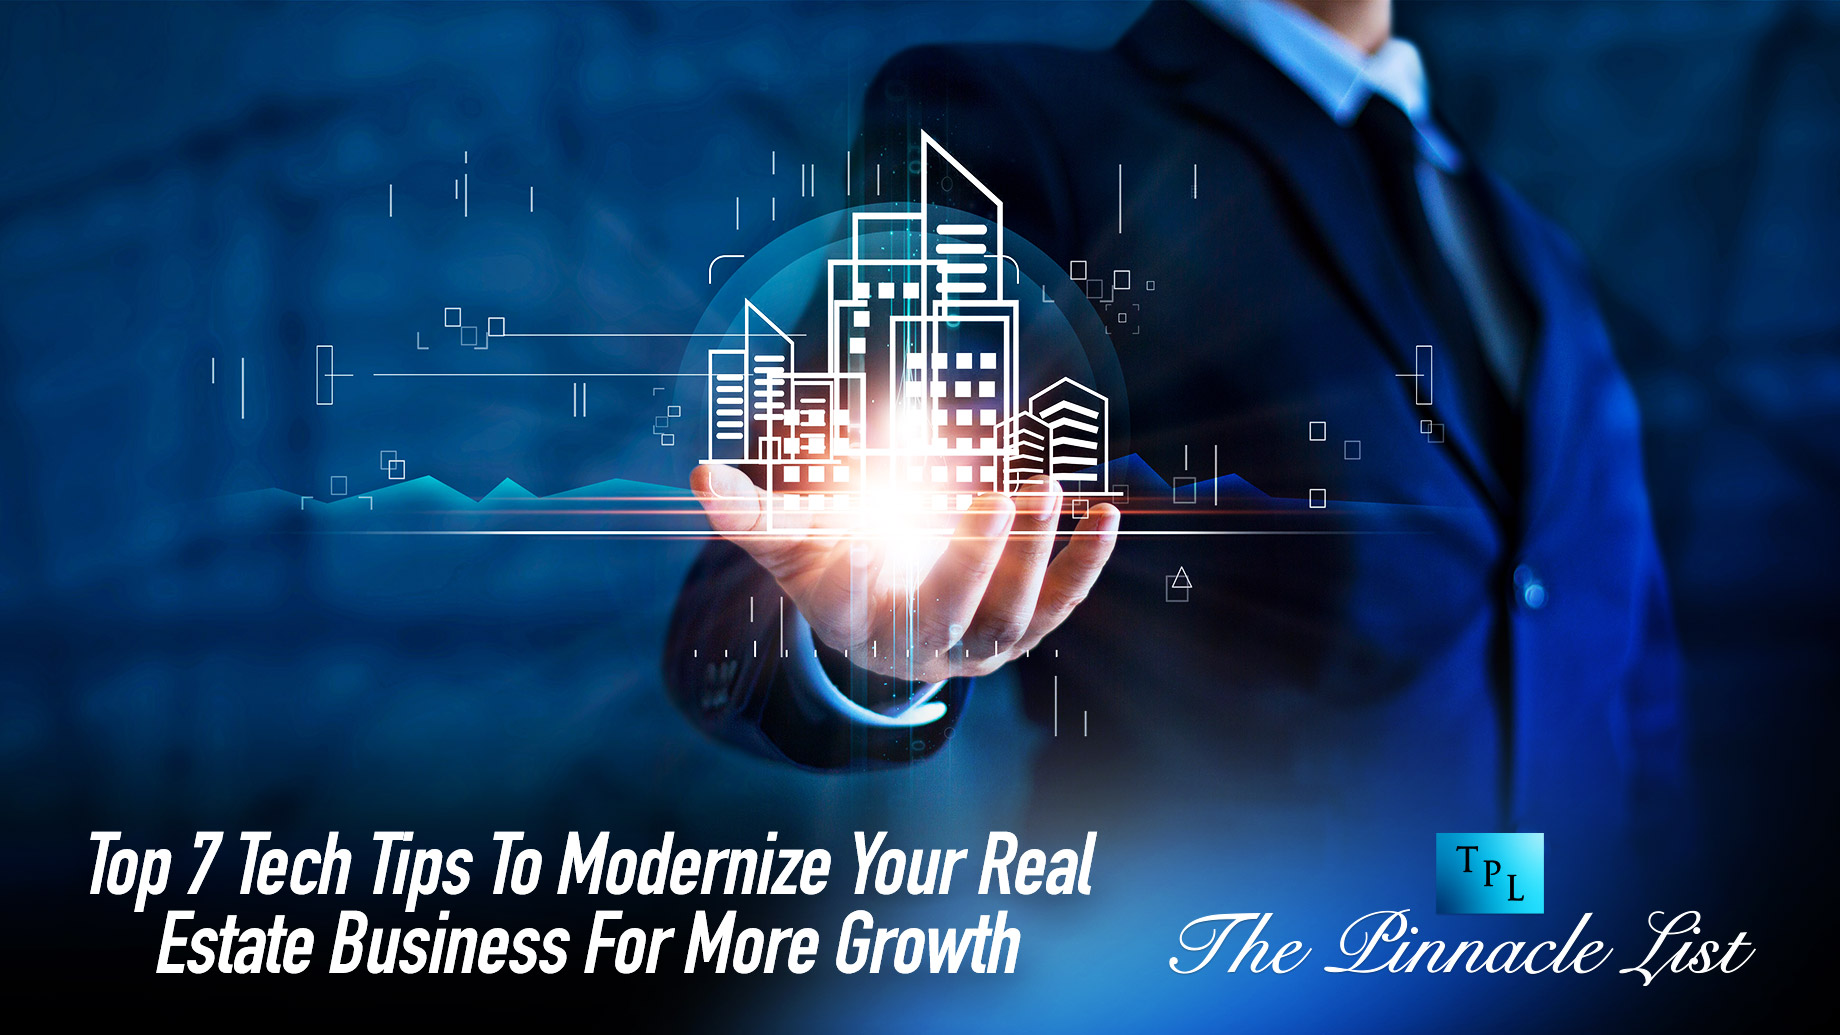 Top 7 Tech Tips To Modernize Your Real Estate Business For More Growth